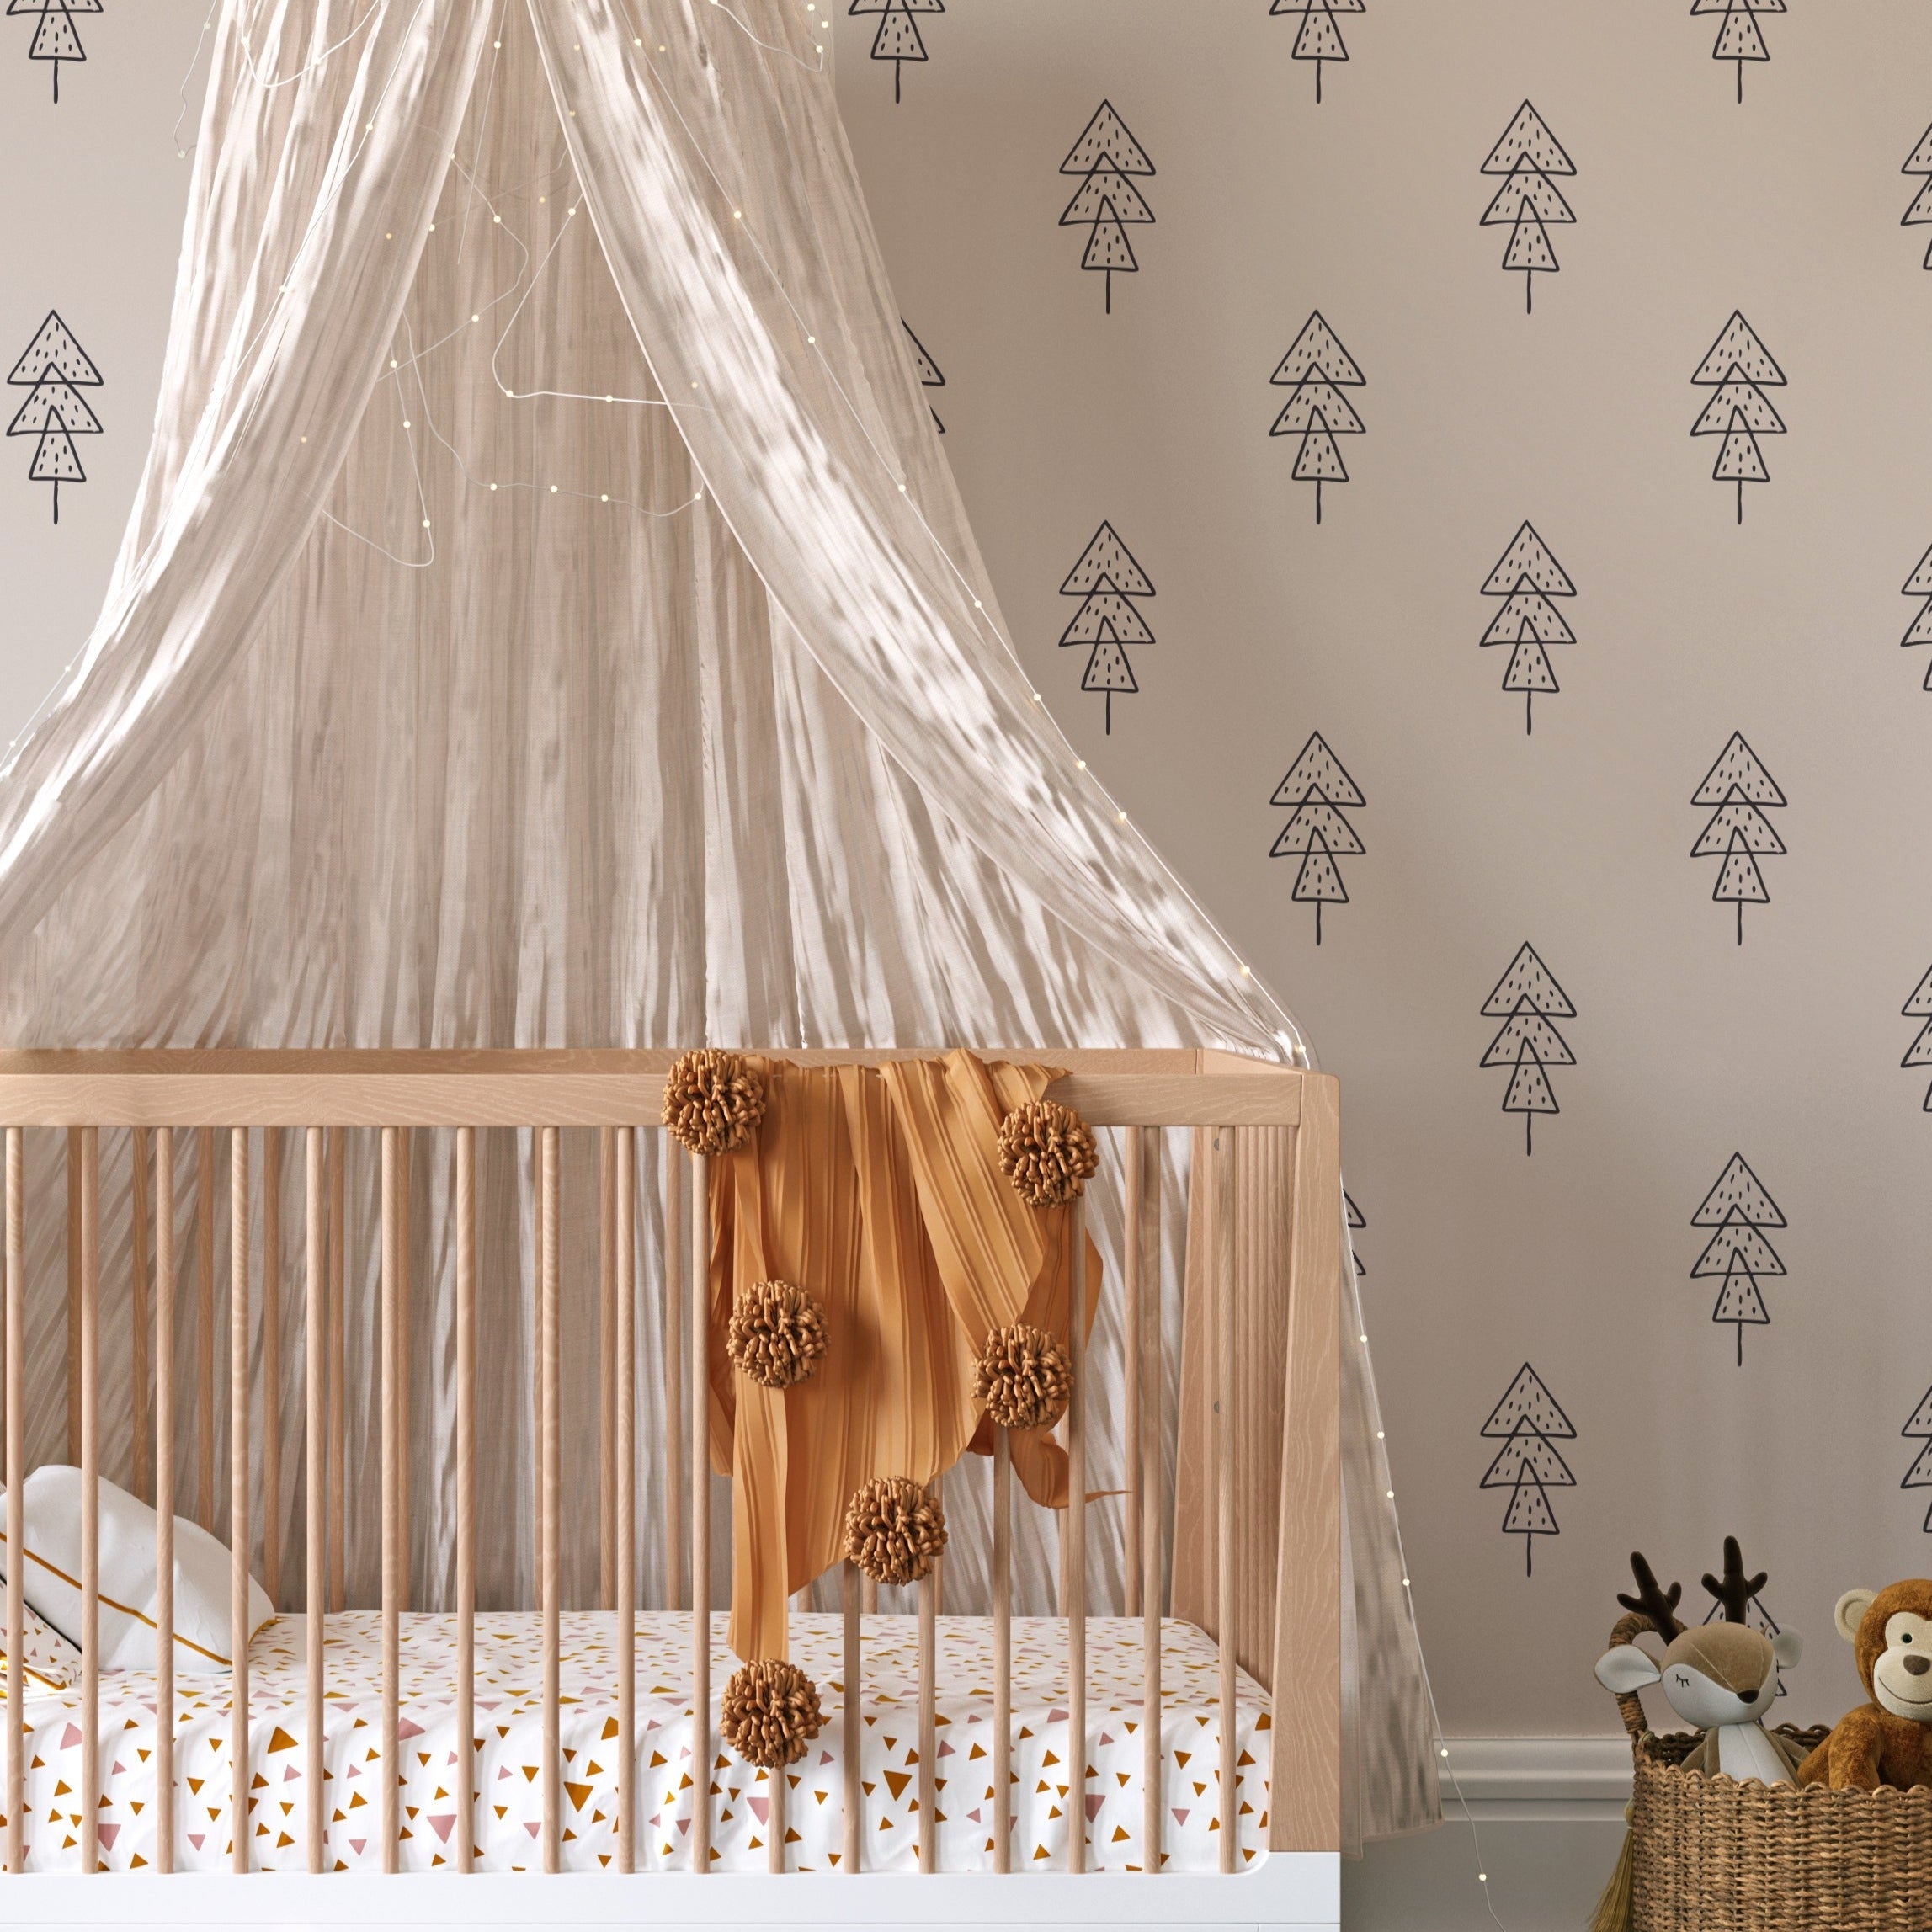 A cozy nursery room with one wall covered in Forest Animal Nursery Wallpaper. The wall features a repetitive pattern of stylized black pine trees on a soft grey backdrop, complementing the room's tranquil theme. A white crib with a sheer canopy and playful bedding enhances the nursery's soothing, woodland-inspired environment.